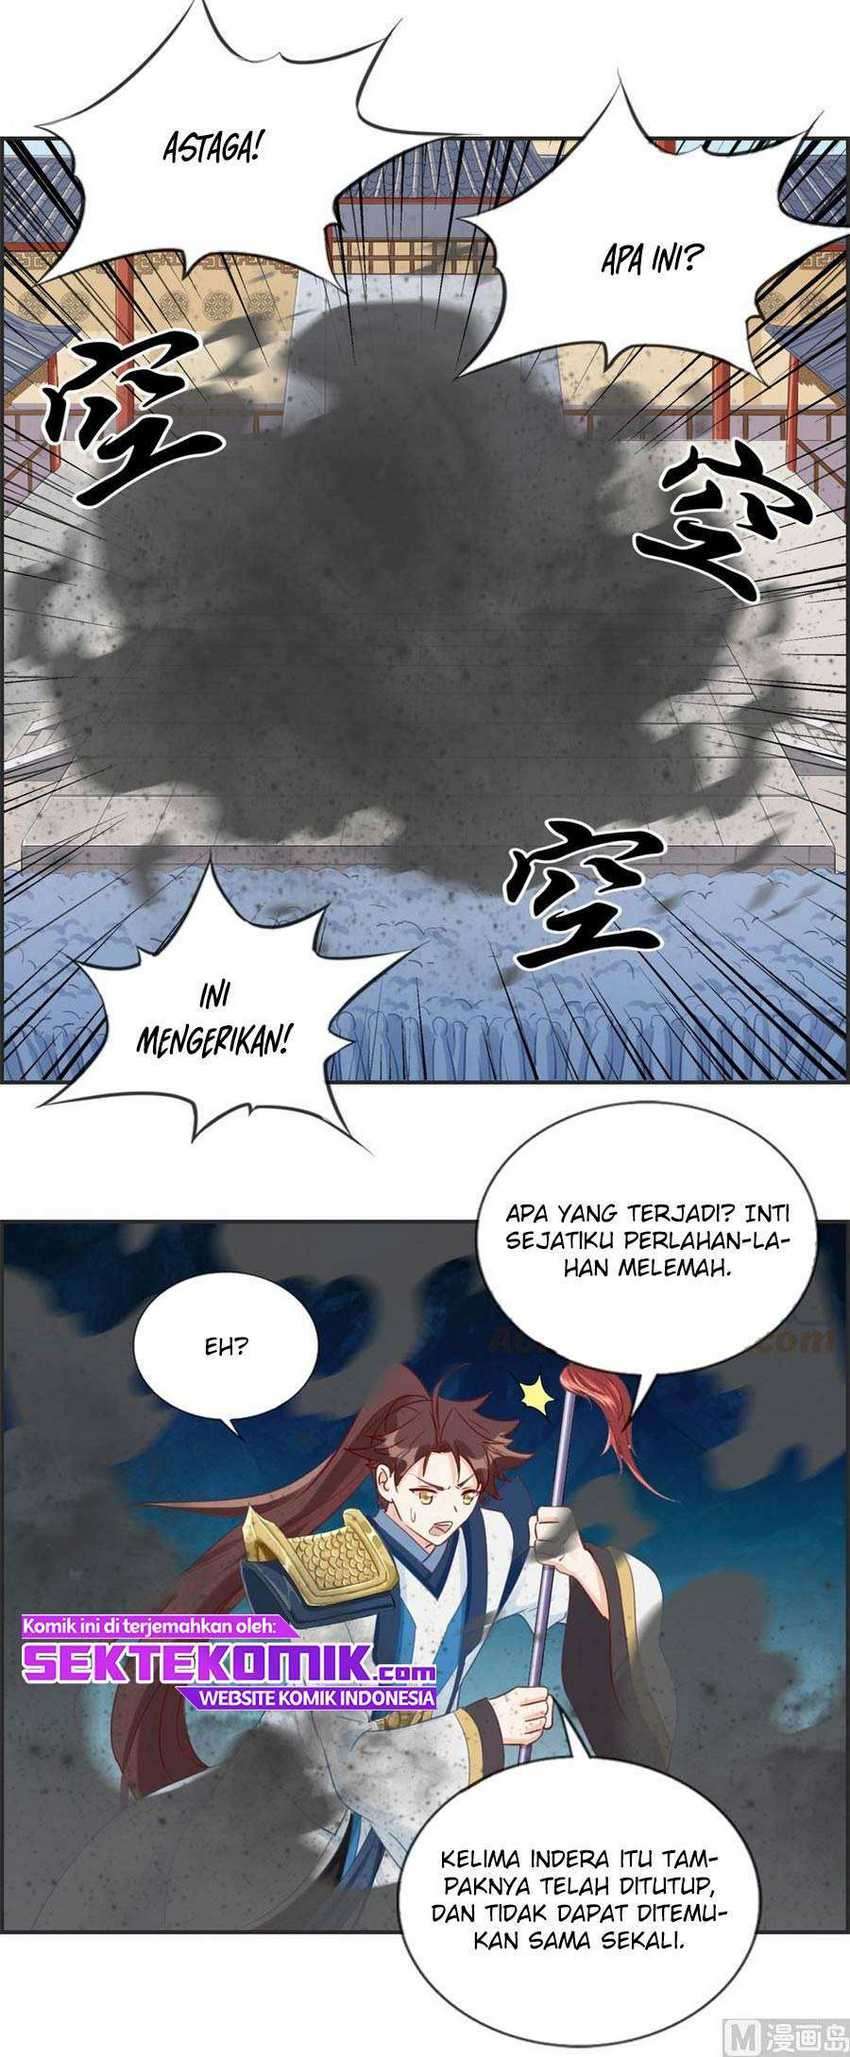 Strongest System Chapter 60